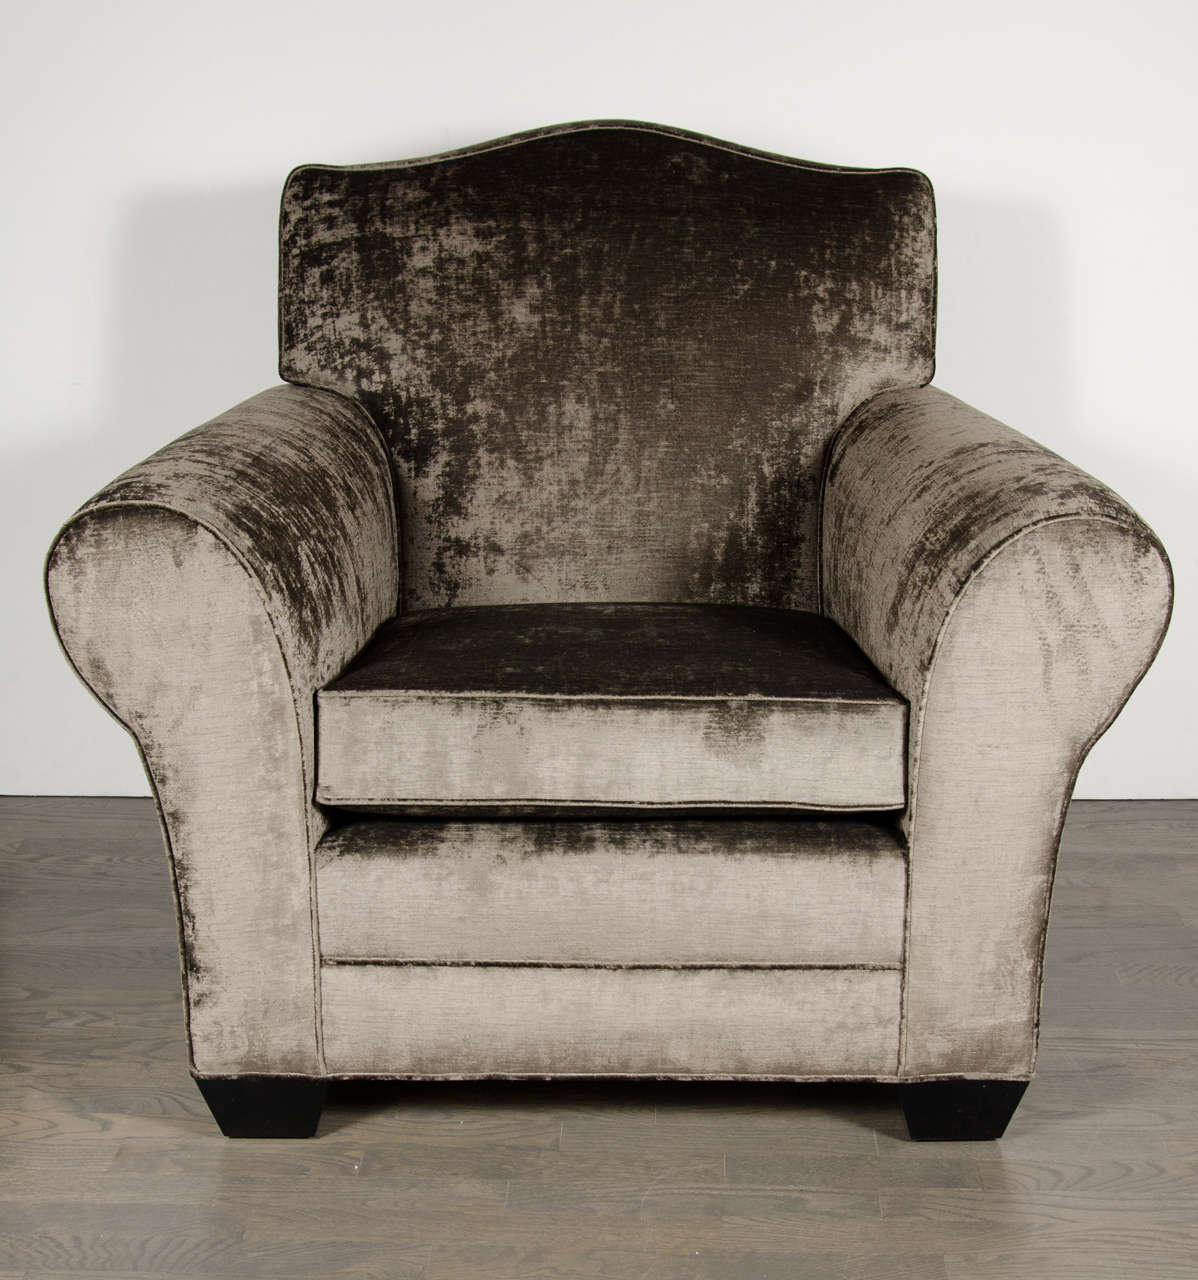 This gorgeous Art Deco French club chair newly upholstered in smoked pewter gauffrage velvet & ebonized walnut legs. It features generous rolled arms, a shield back design and a deep seat you can really sink into. Completely restored to mint